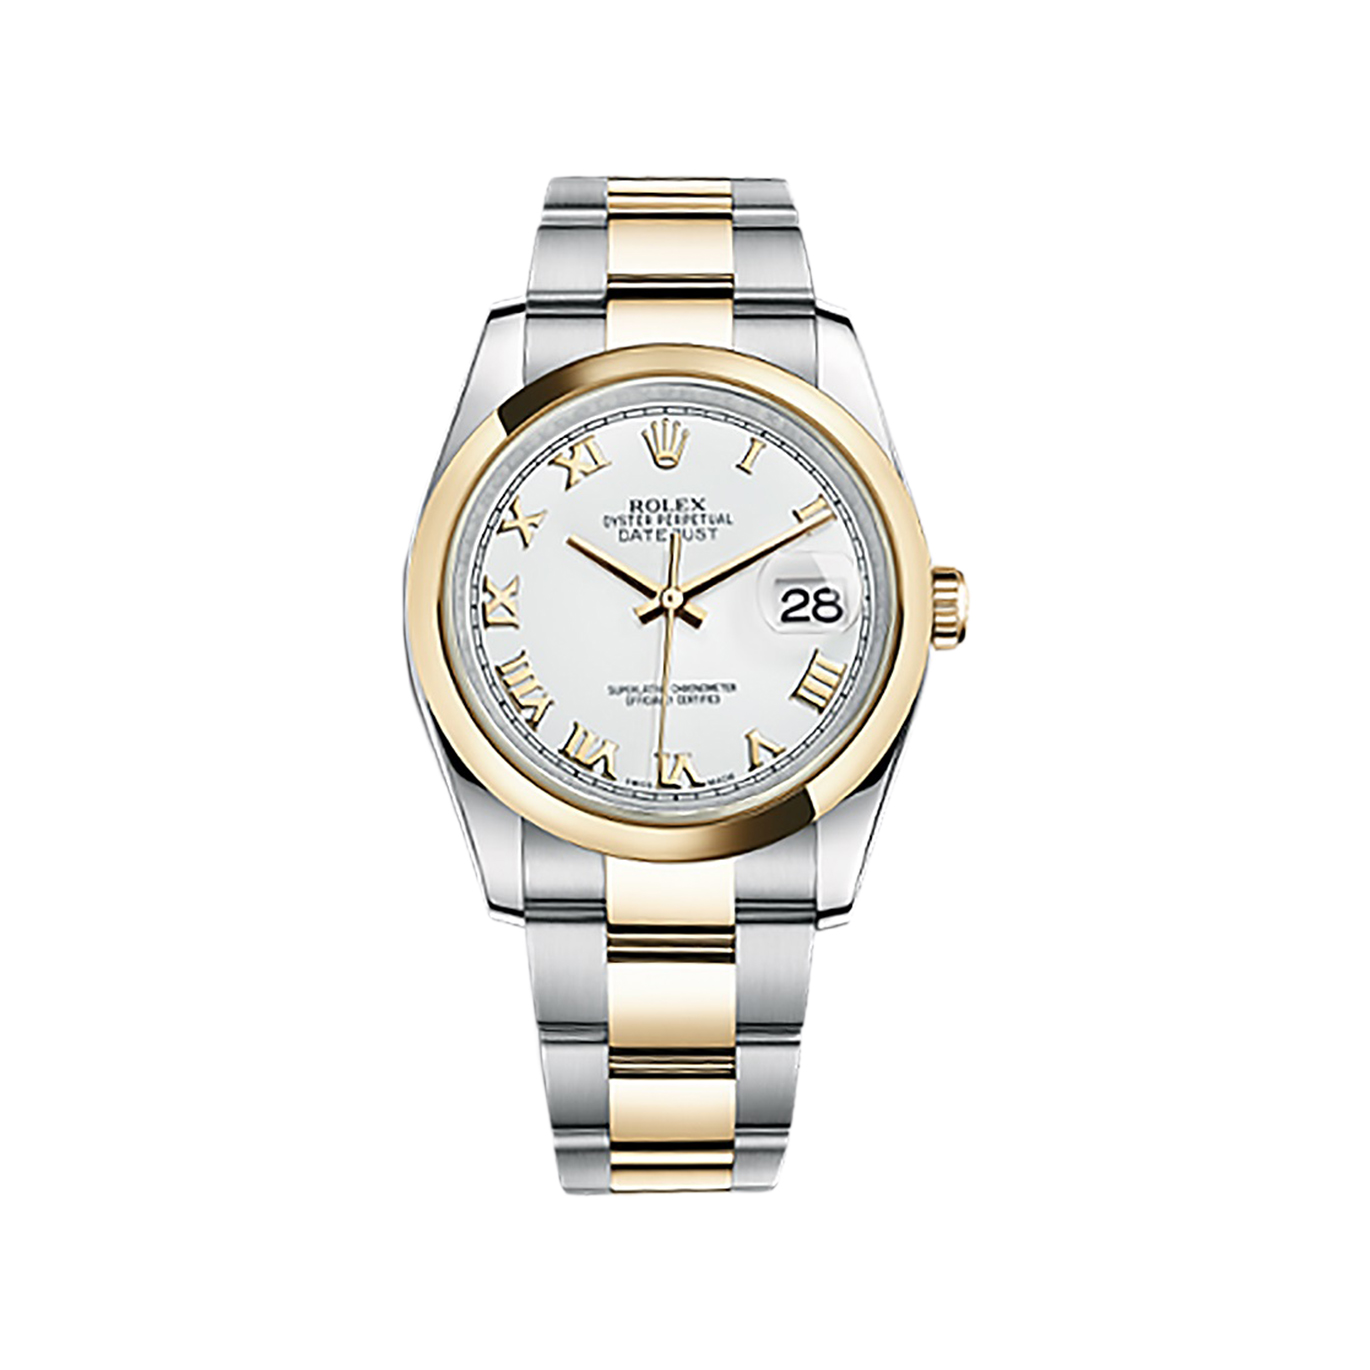 Datejust 36 116203 Gold & Stainless Steel Watch (White)